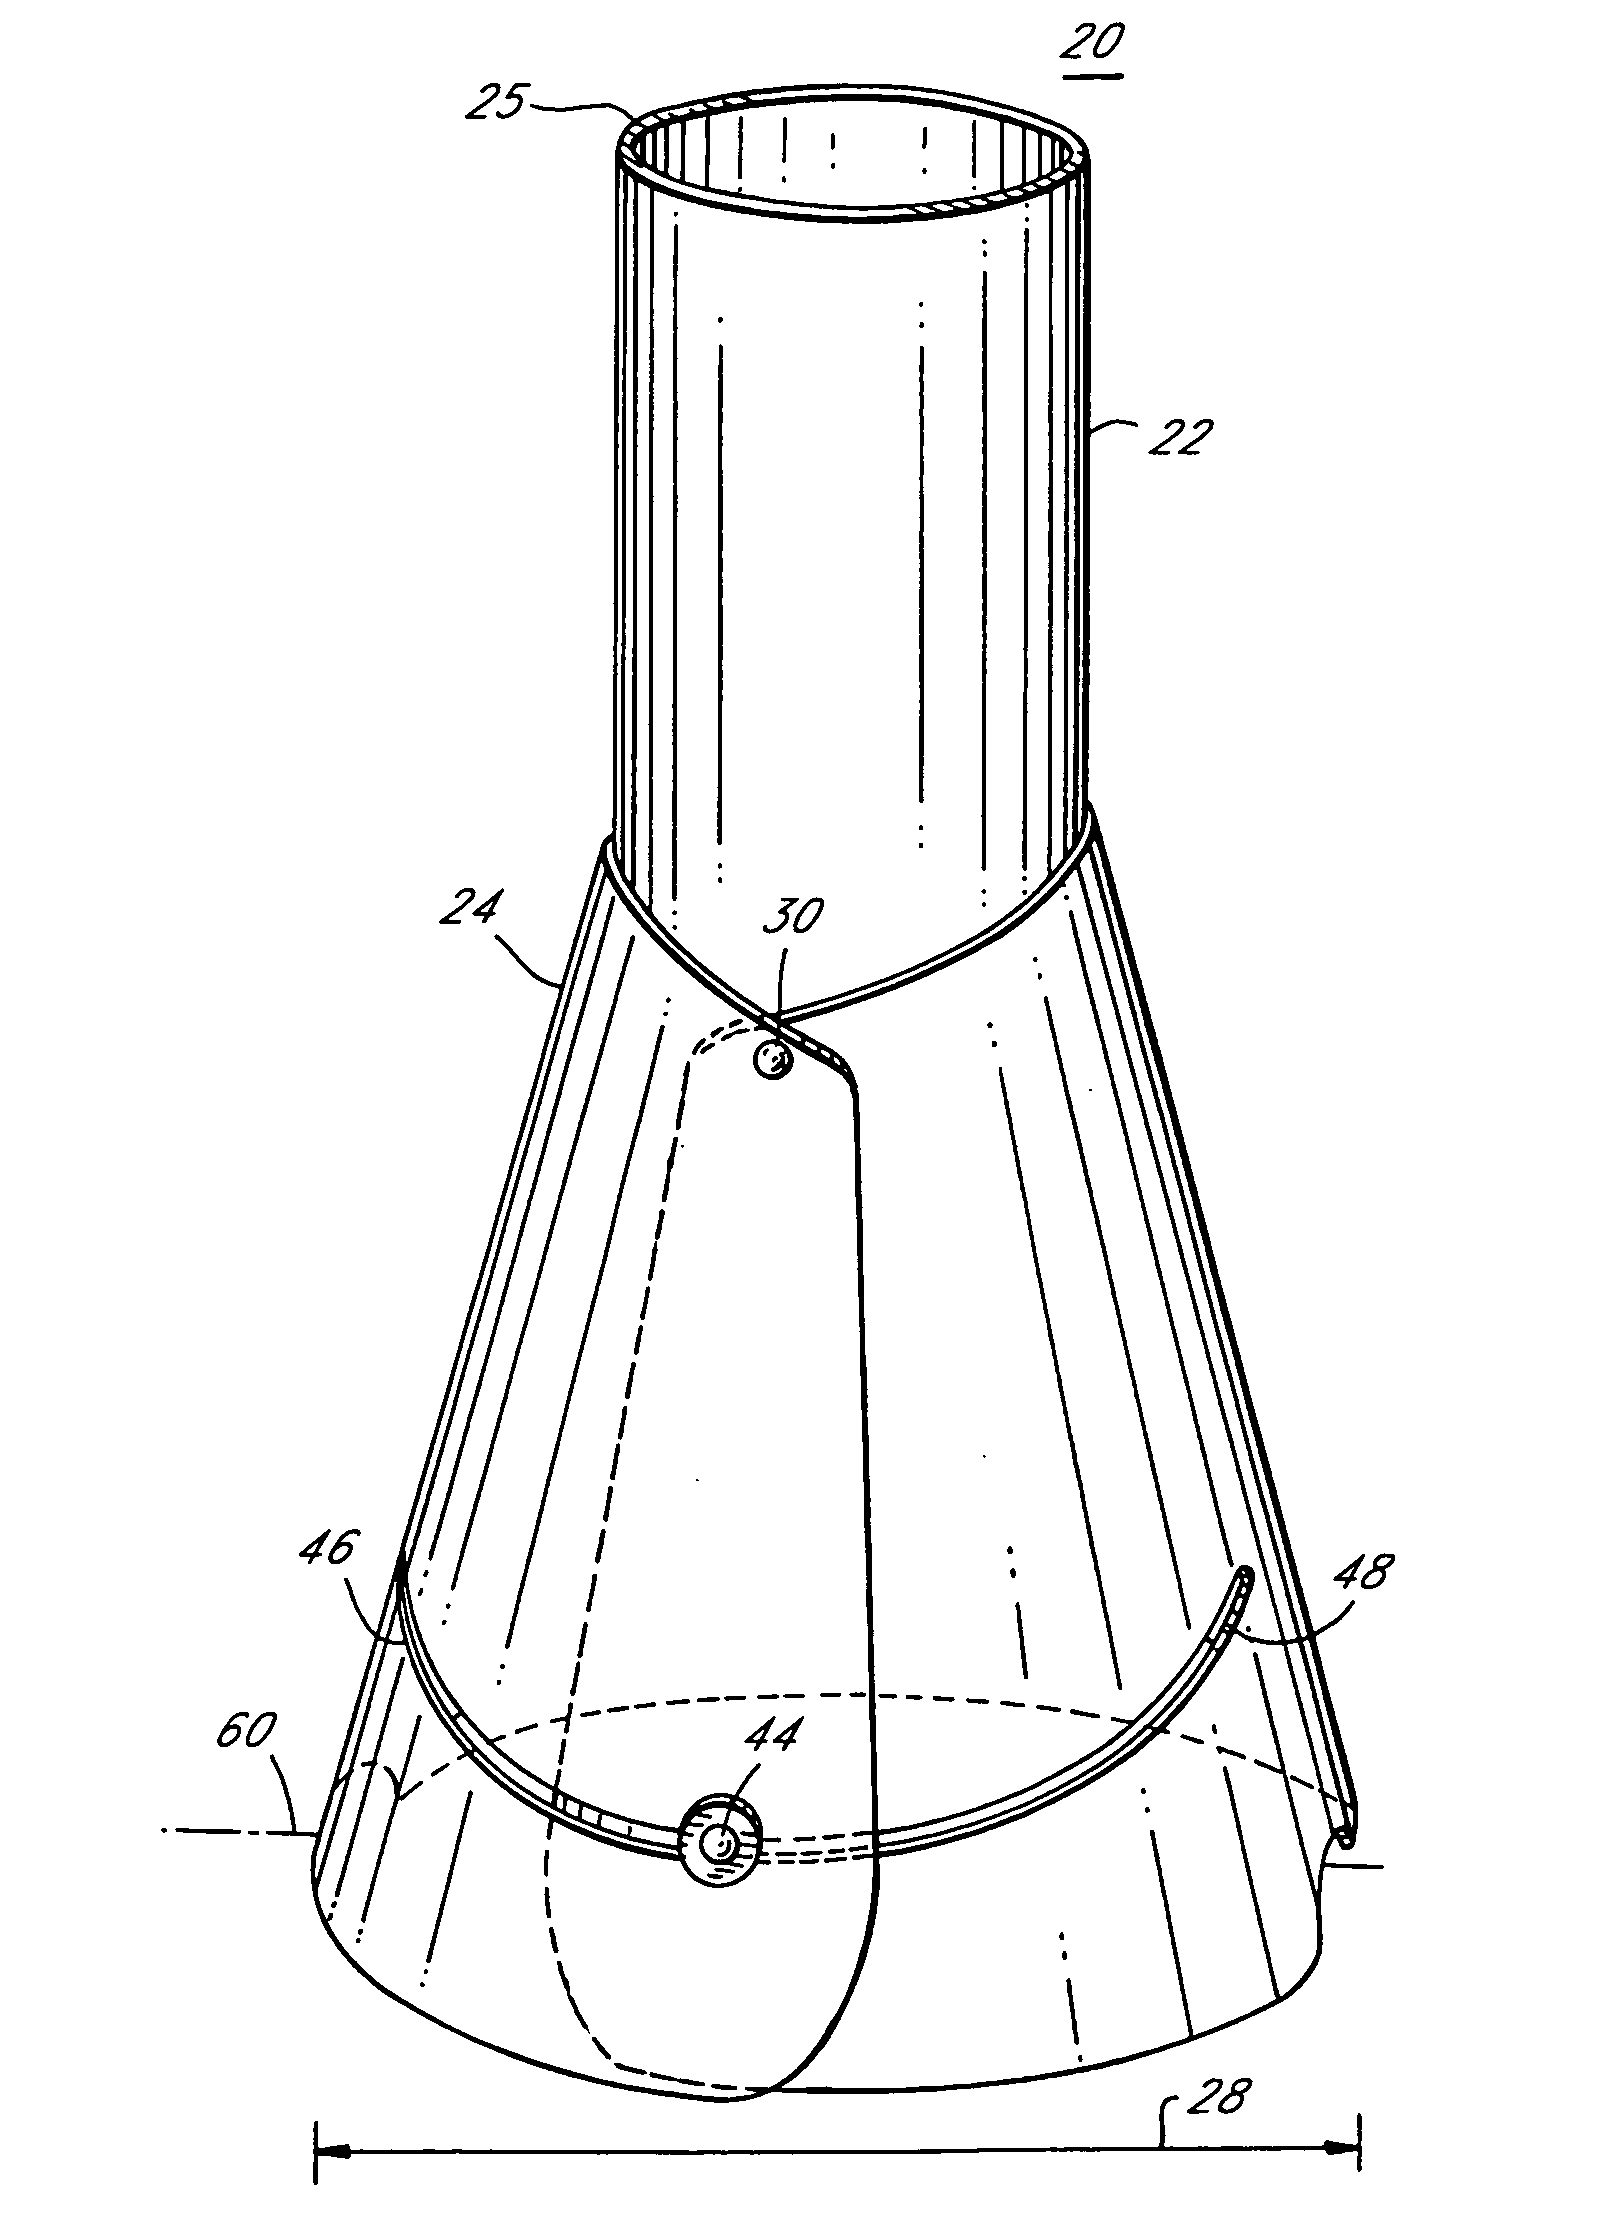 Adjustable height access device for treating the spine of a patient